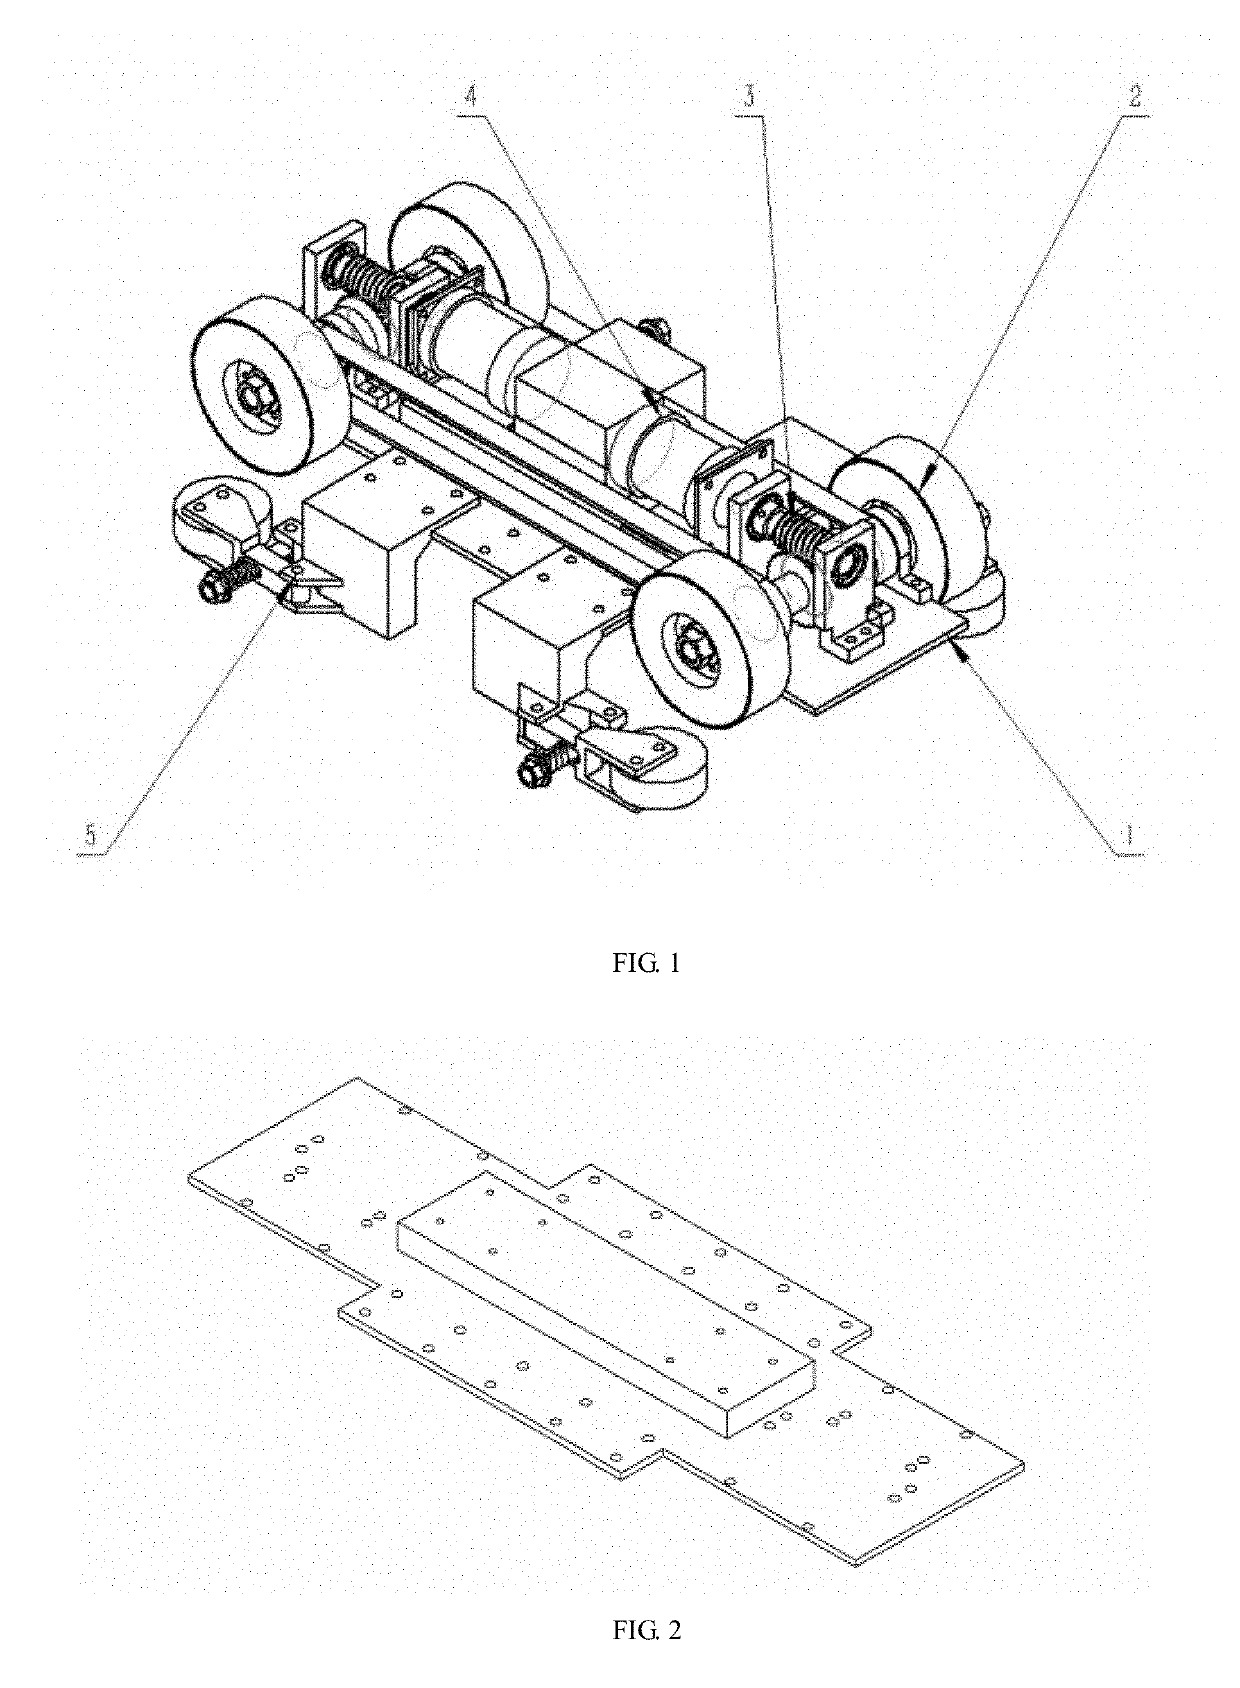 Device and method for periodically inspecting rigid guide